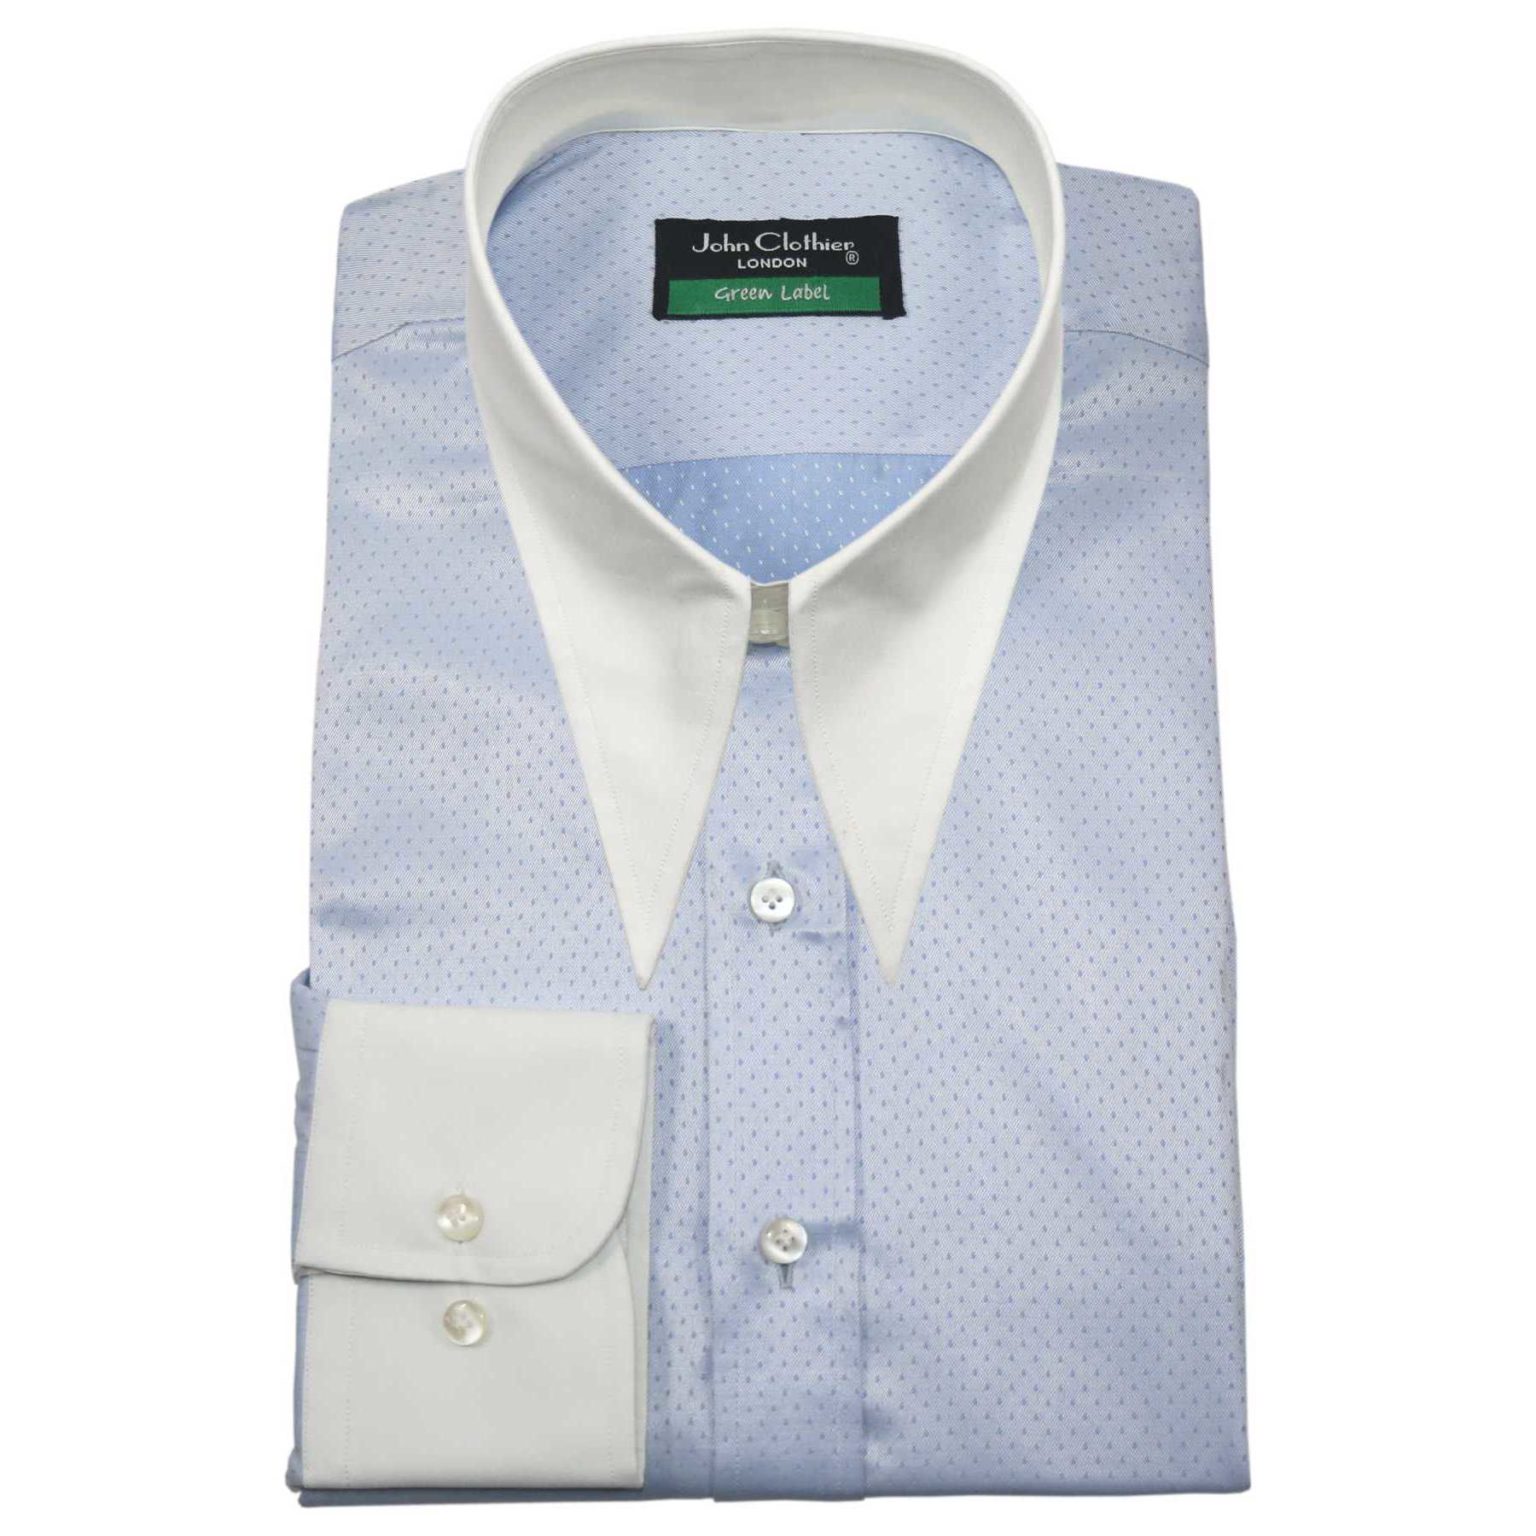 Spear collar Shirts - Online Shopping - Page 4 of 7 - John Clothier London